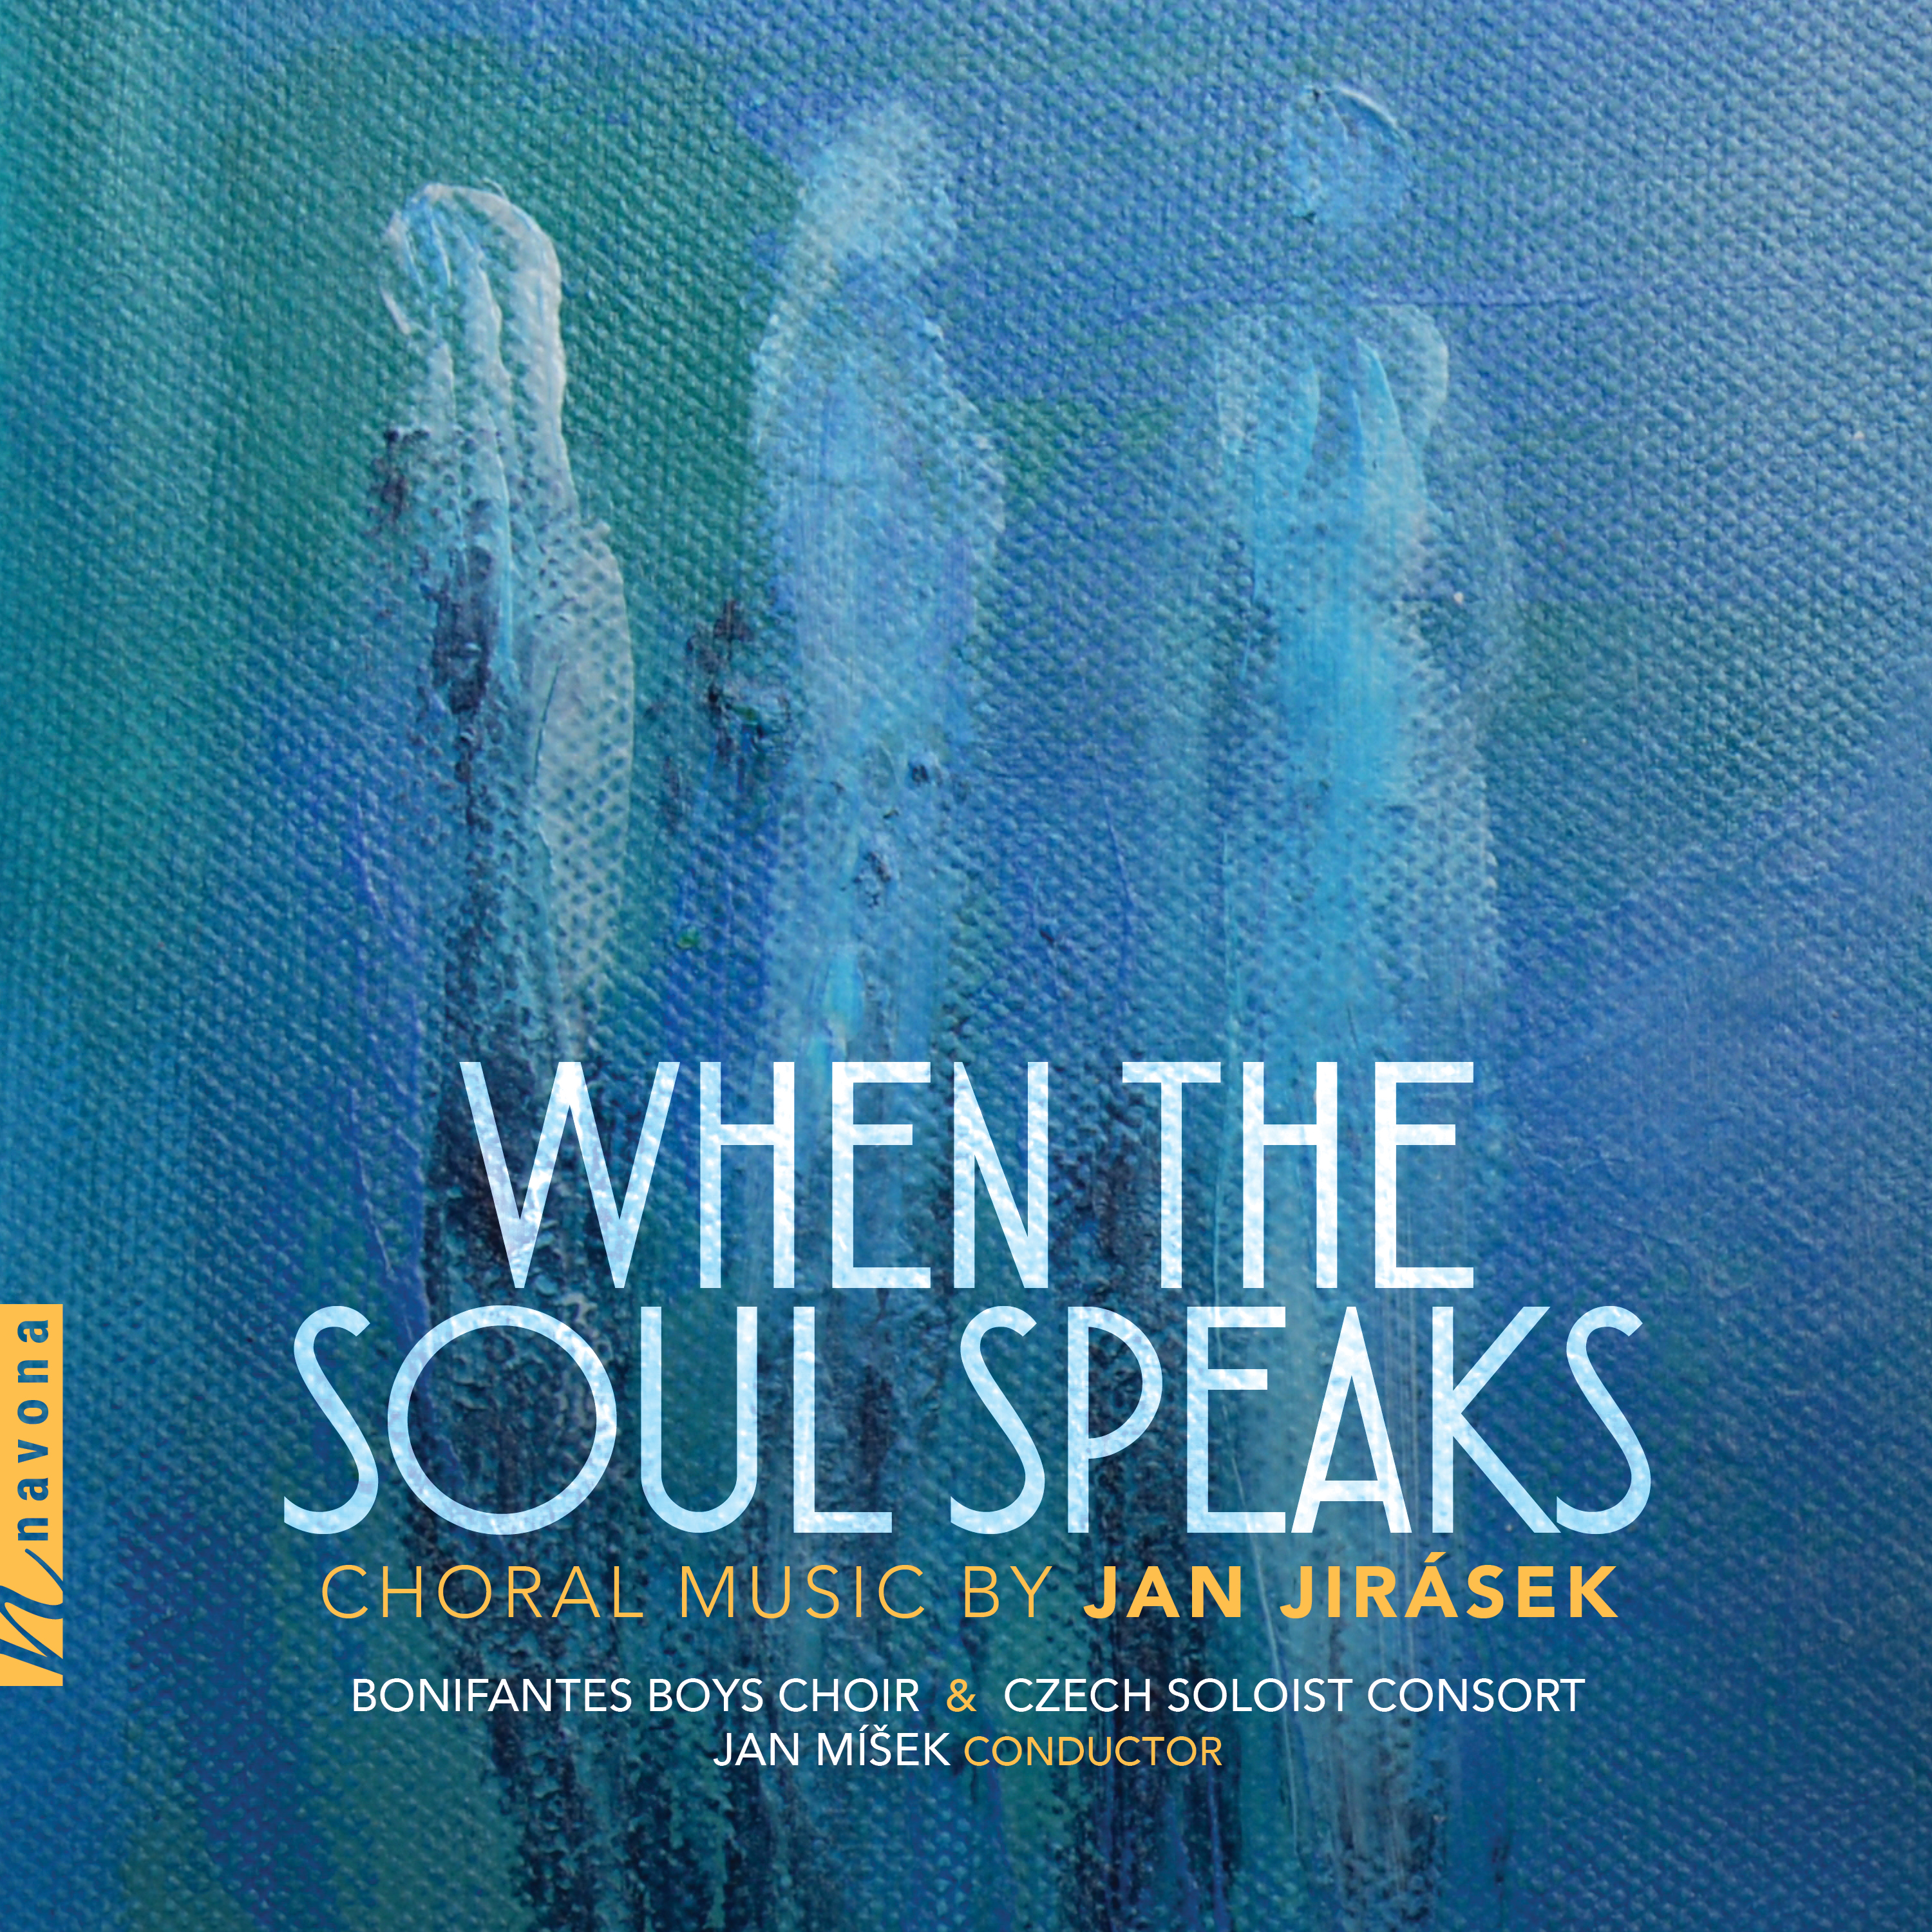 Within my Soul - Ravello Records